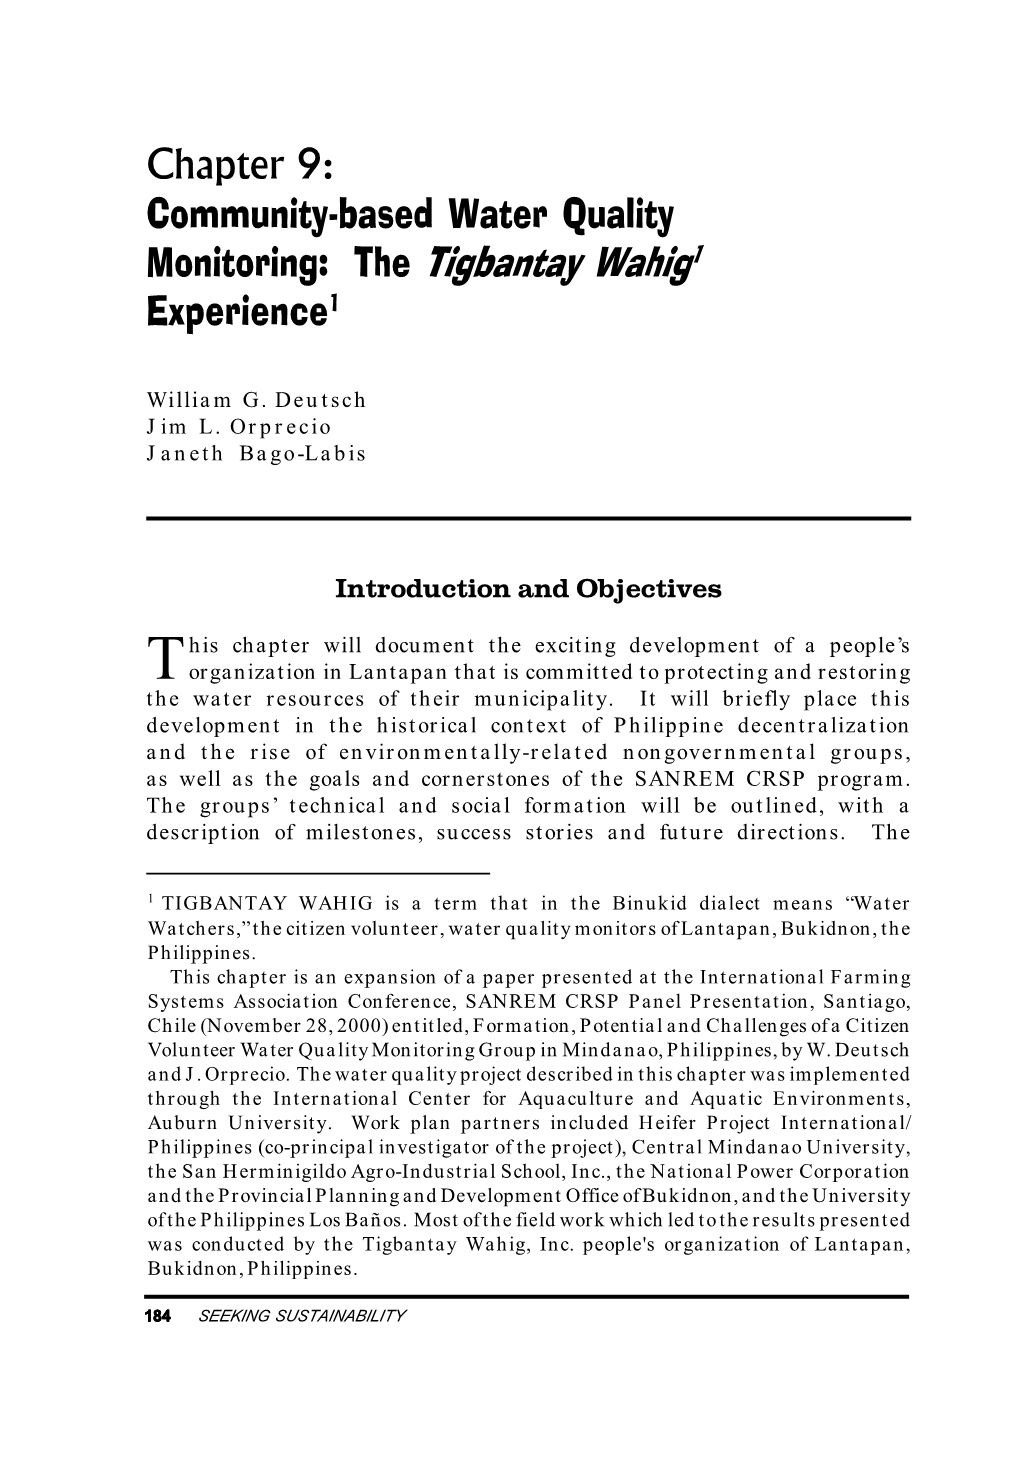 Chapter 9: Community-Based Water Quality Monitoring: the Tigbantay Wahig1 Experience1